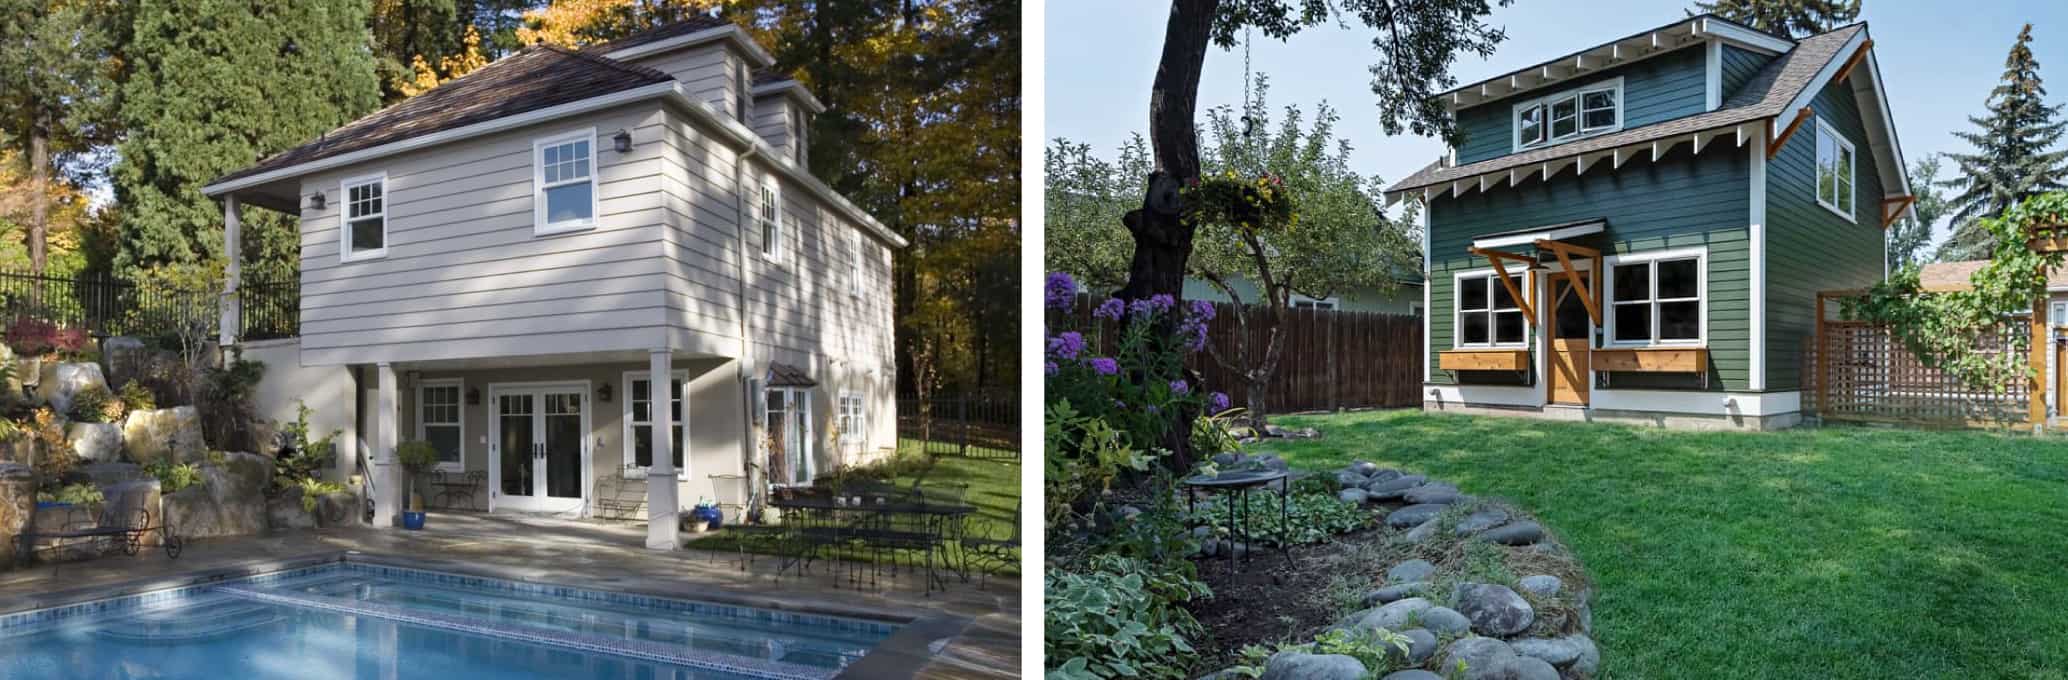 split image showing two different accessory dwelling units side by side